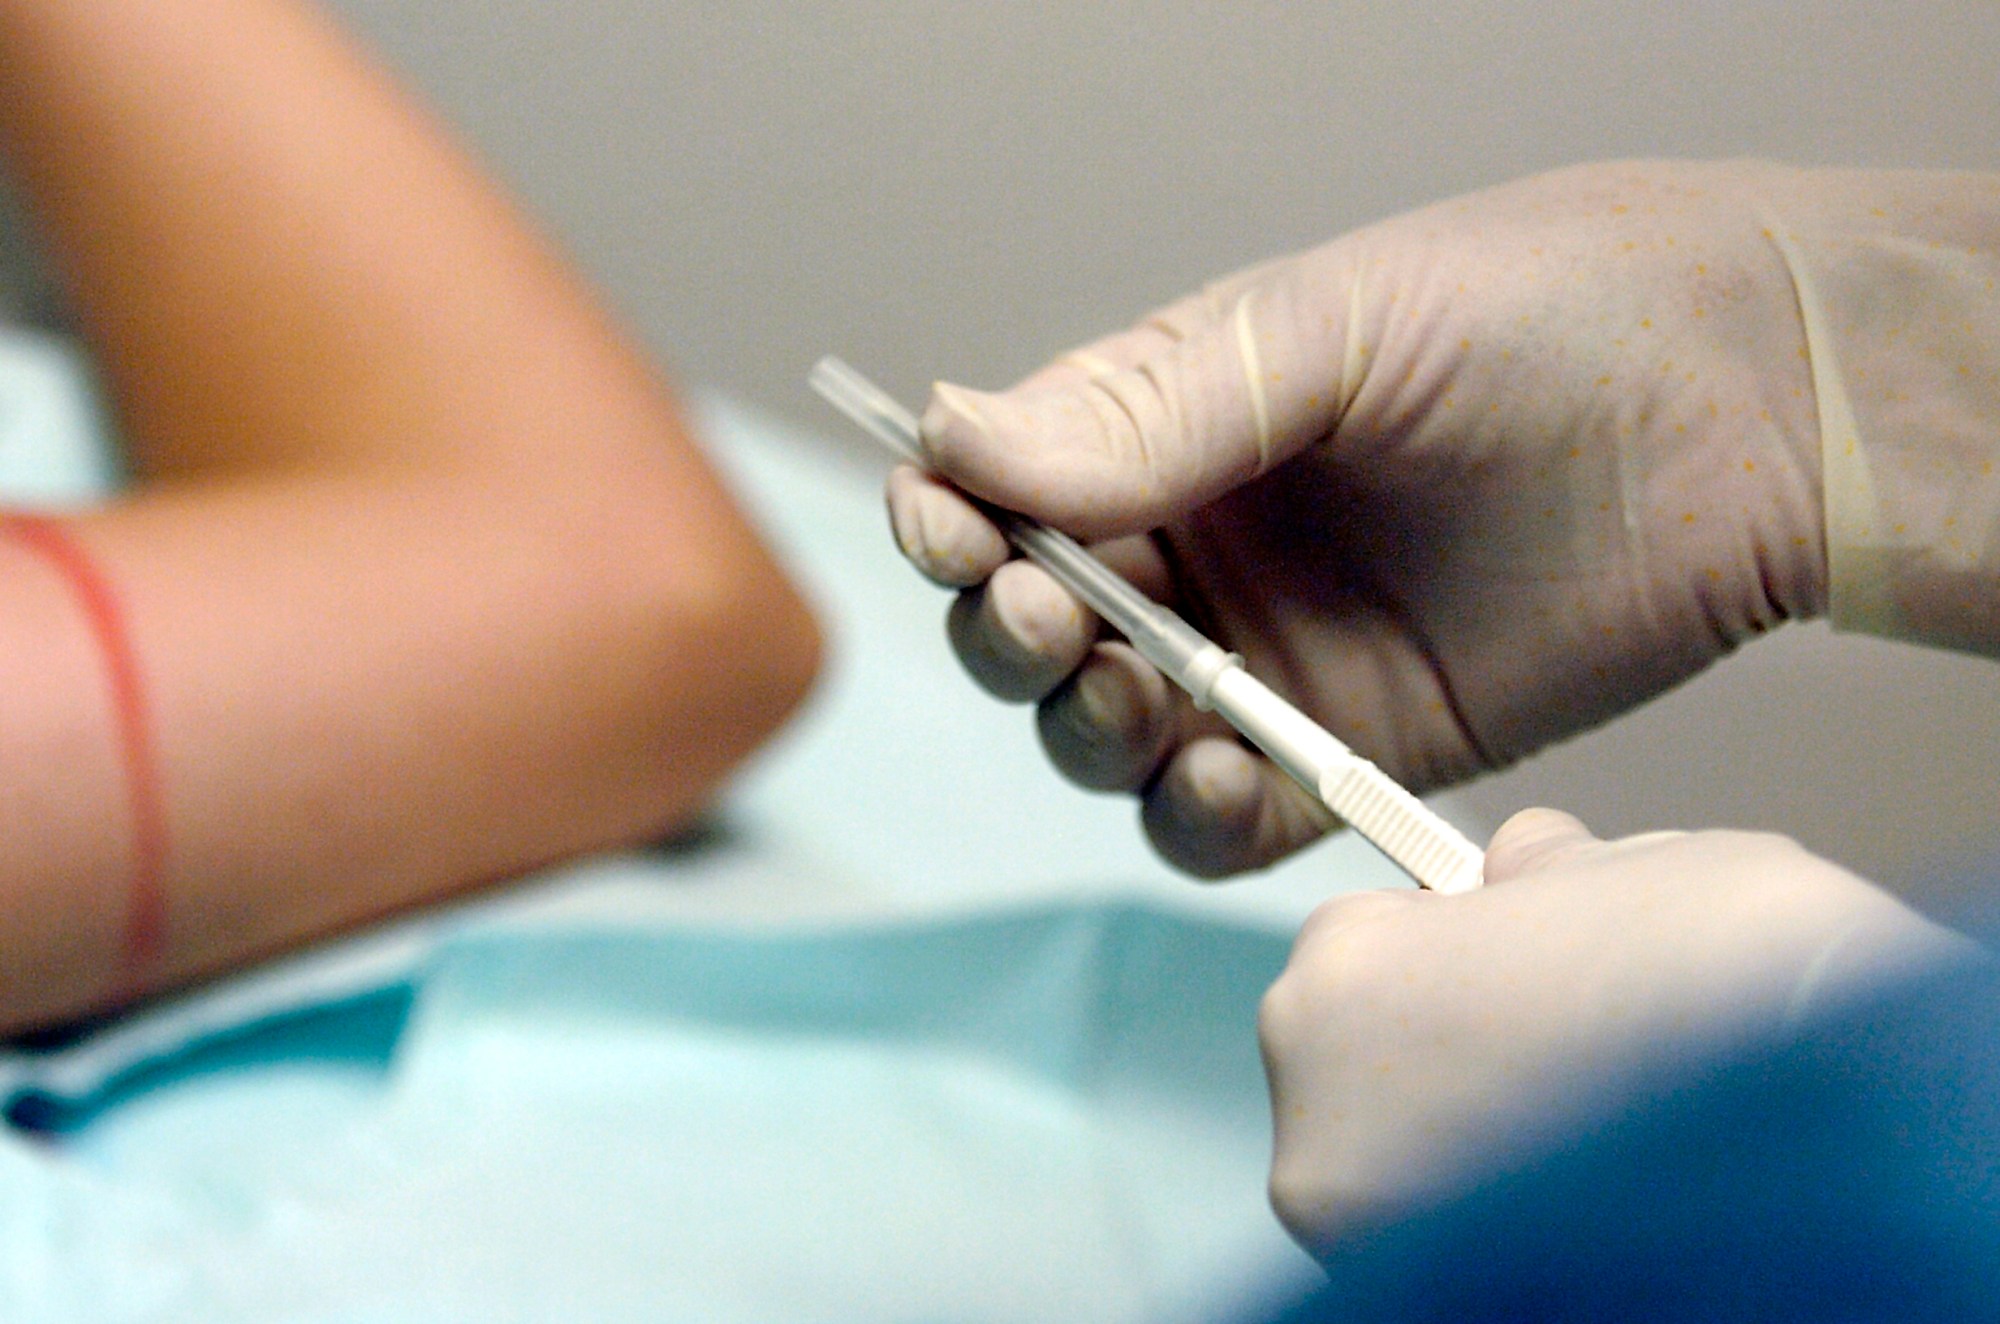 In a close-up shot, a nurse's gloved hands hold a single-use needle to implant the birth control device in the patient's prepped arm.